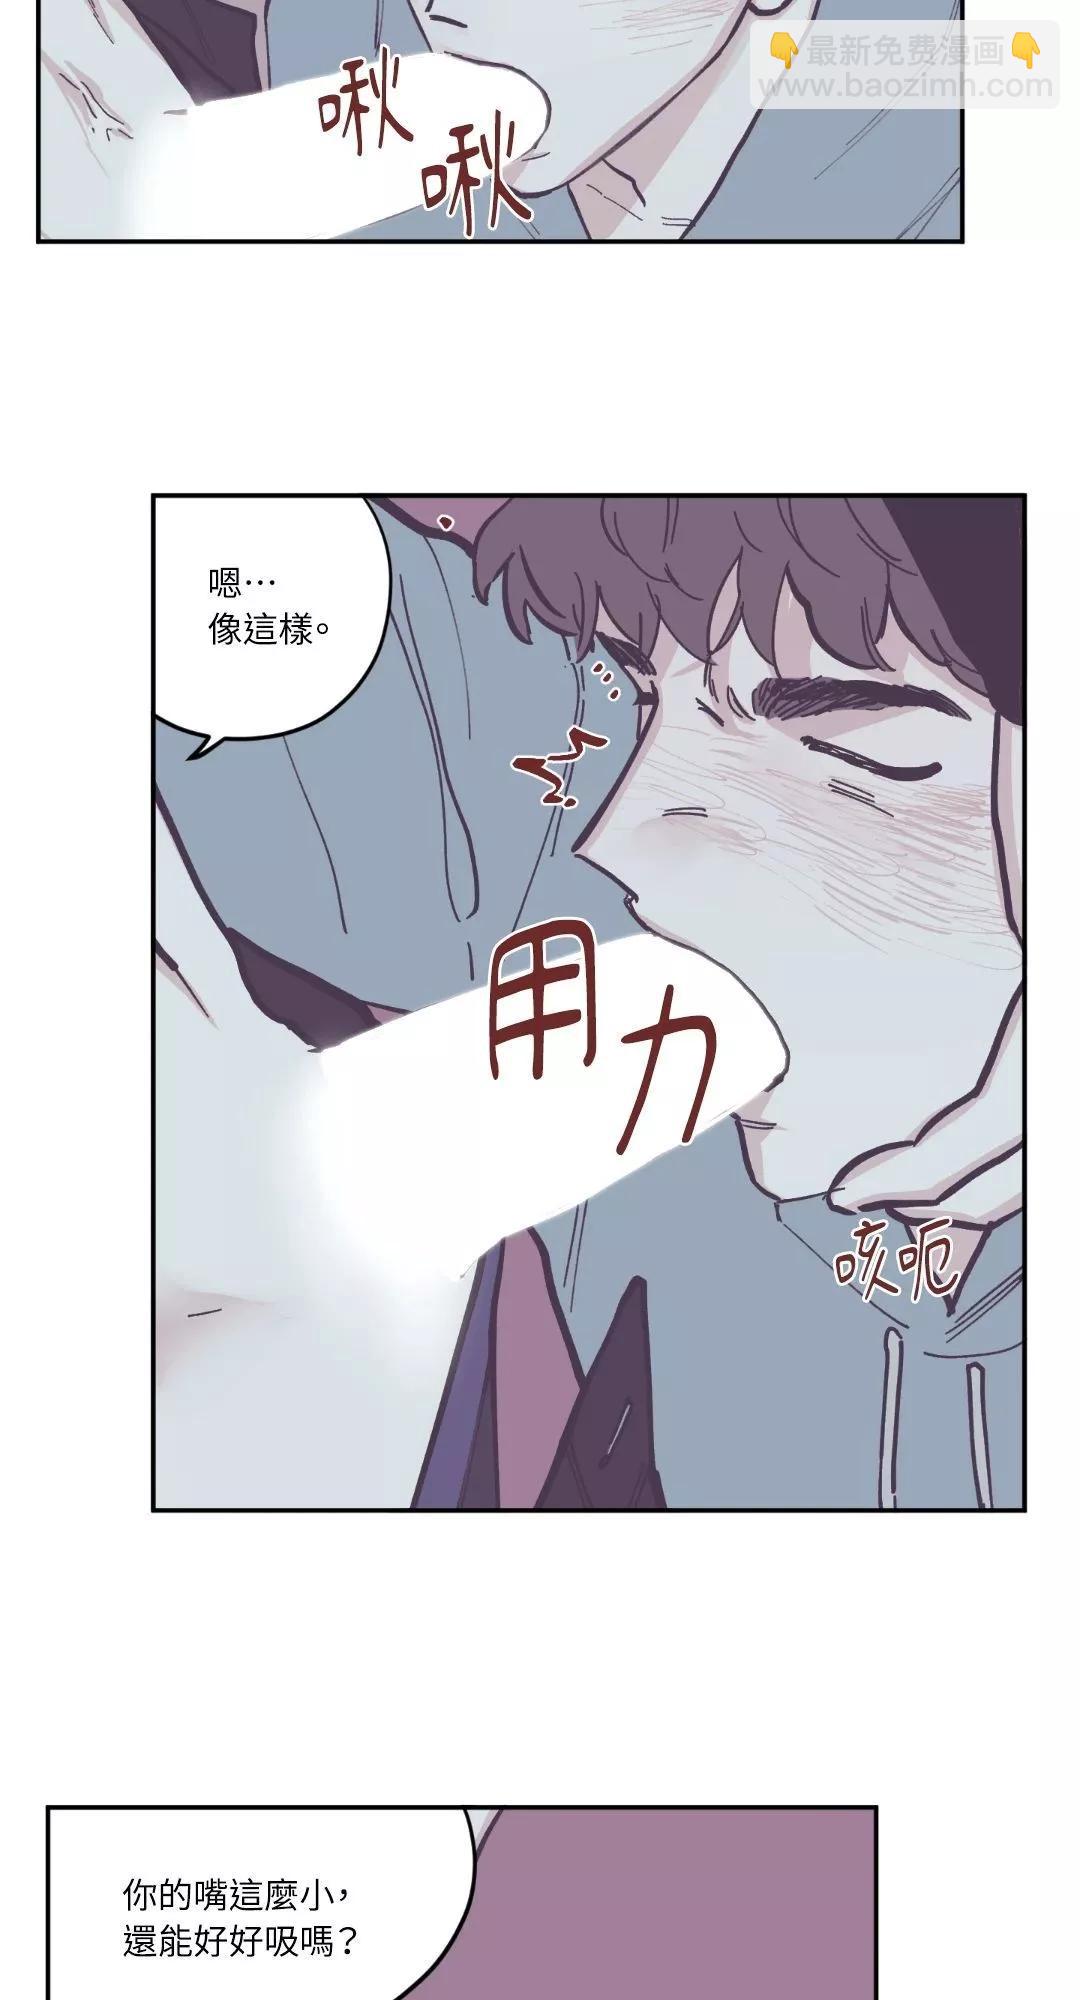 Clean Up百分百 - 第73話 - 4